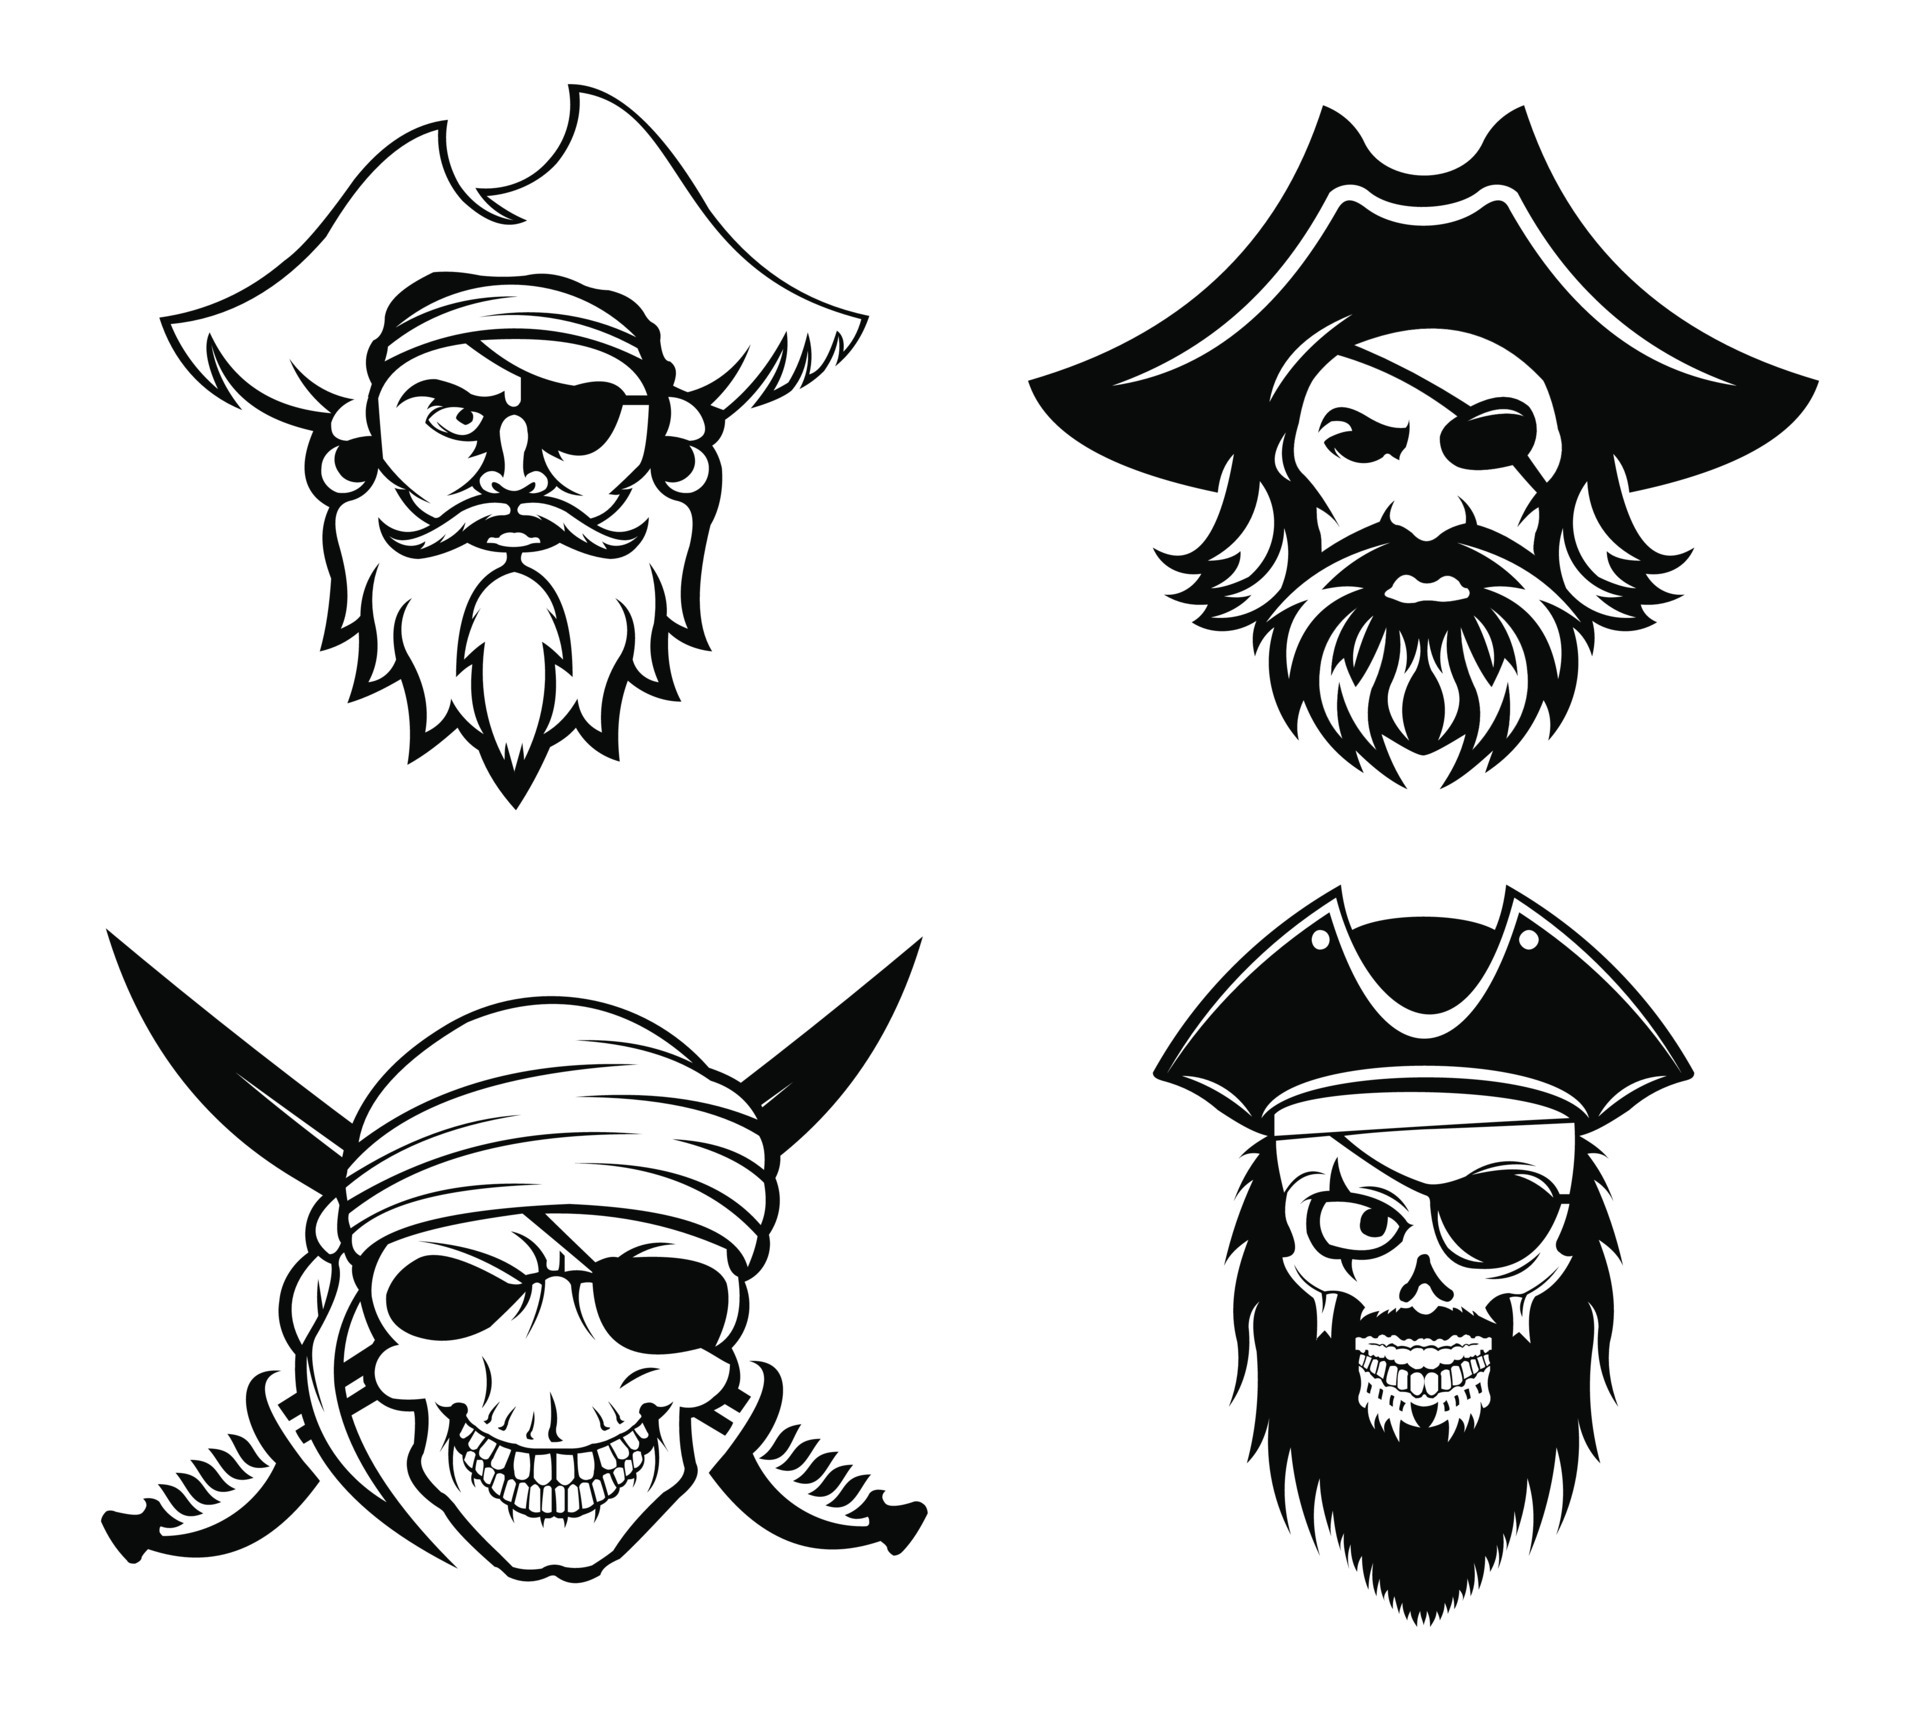 Pirate skull in hat sketch Royalty Free Vector Image